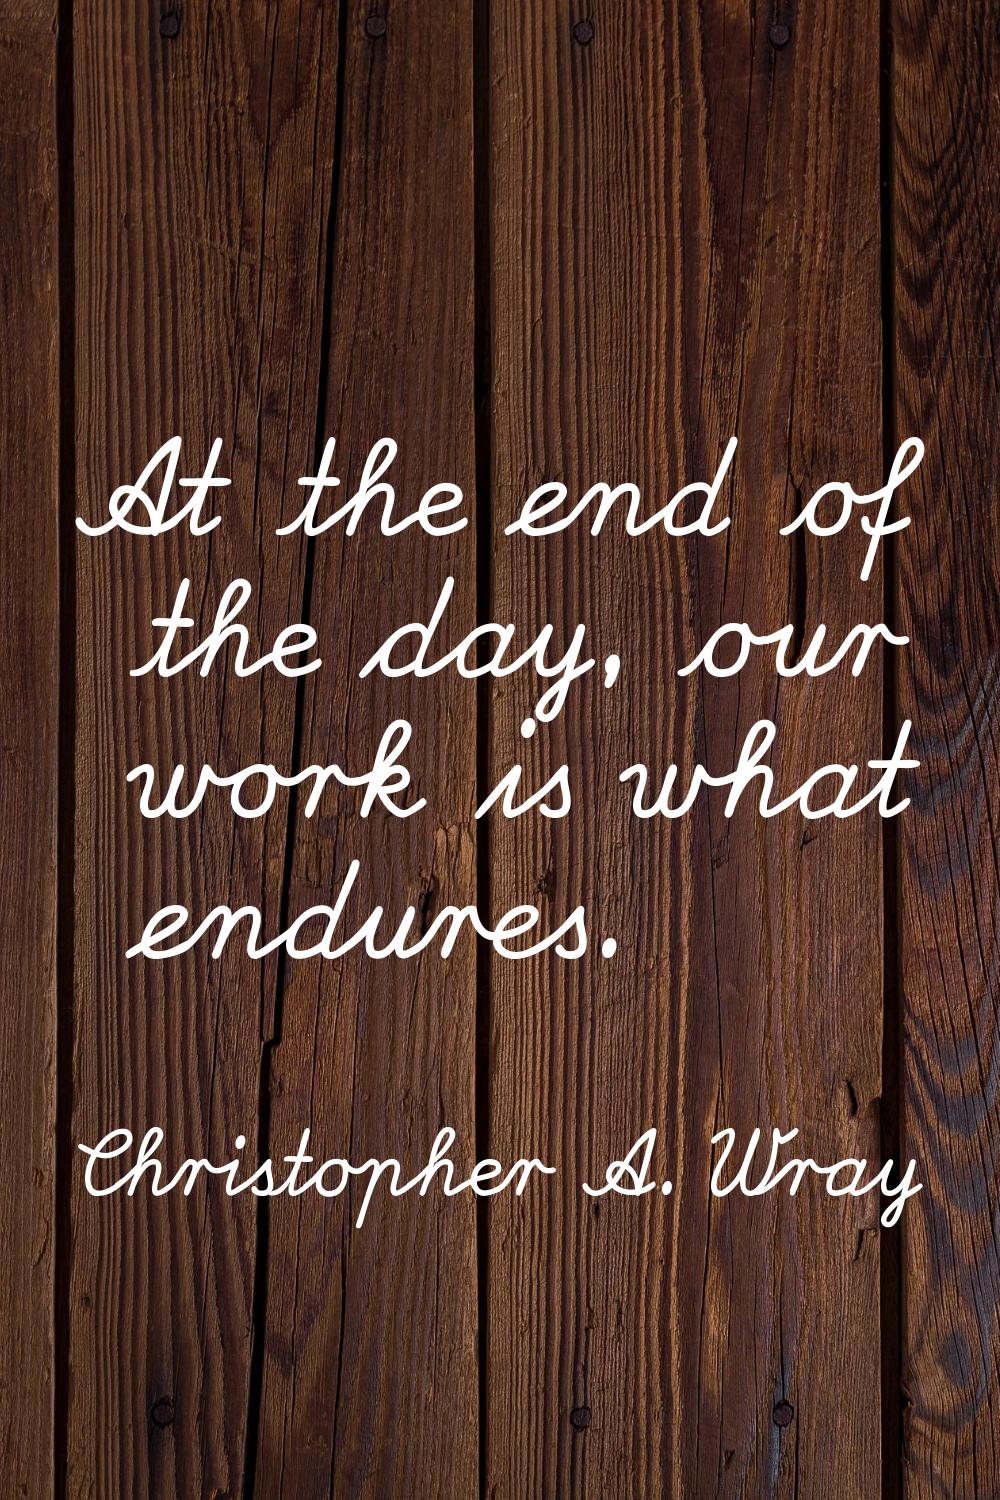 At the end of the day, our work is what endures.